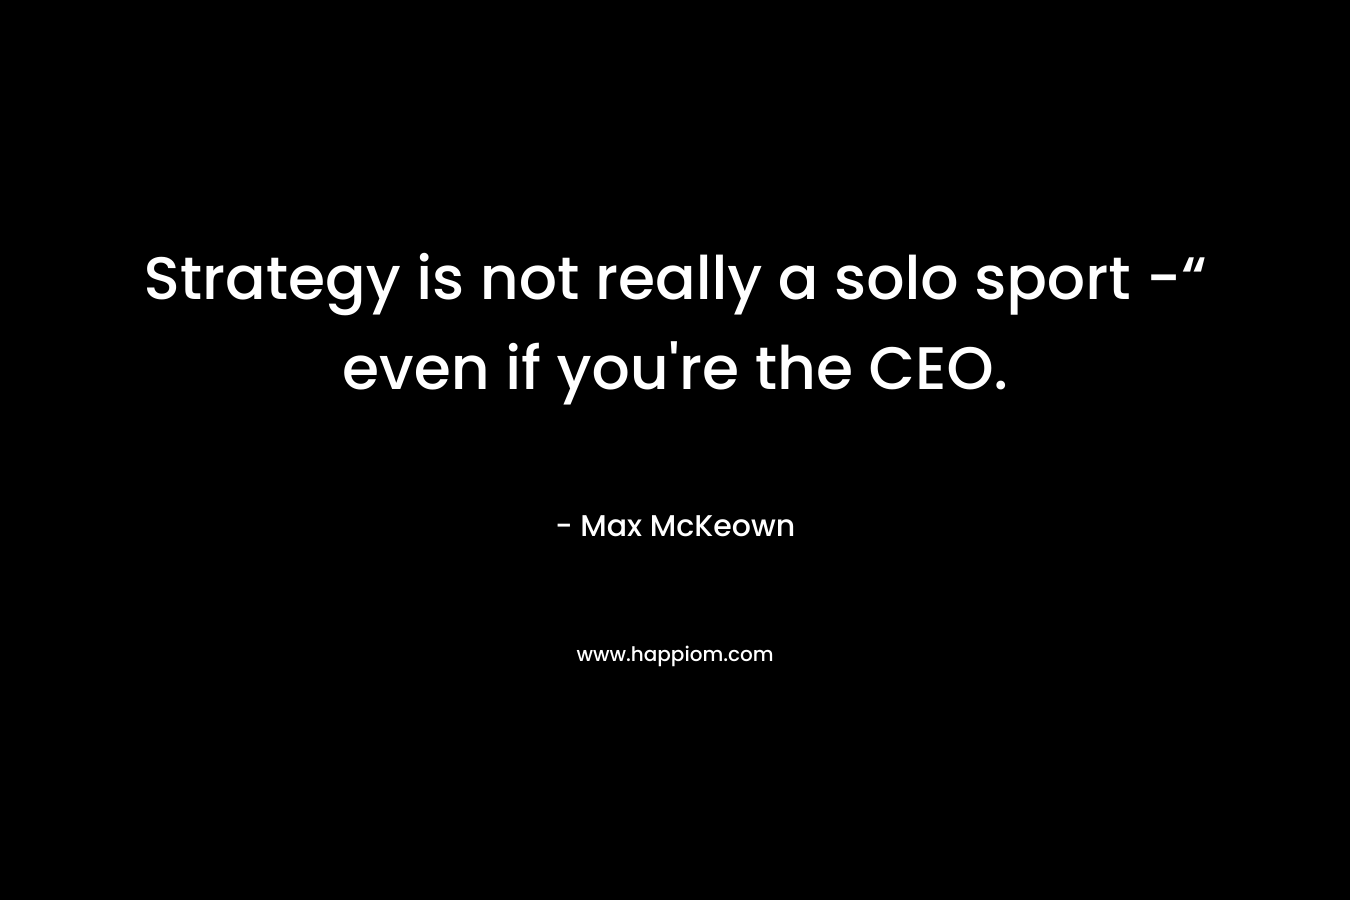 Strategy is not really a solo sport -“ even if you're the CEO.